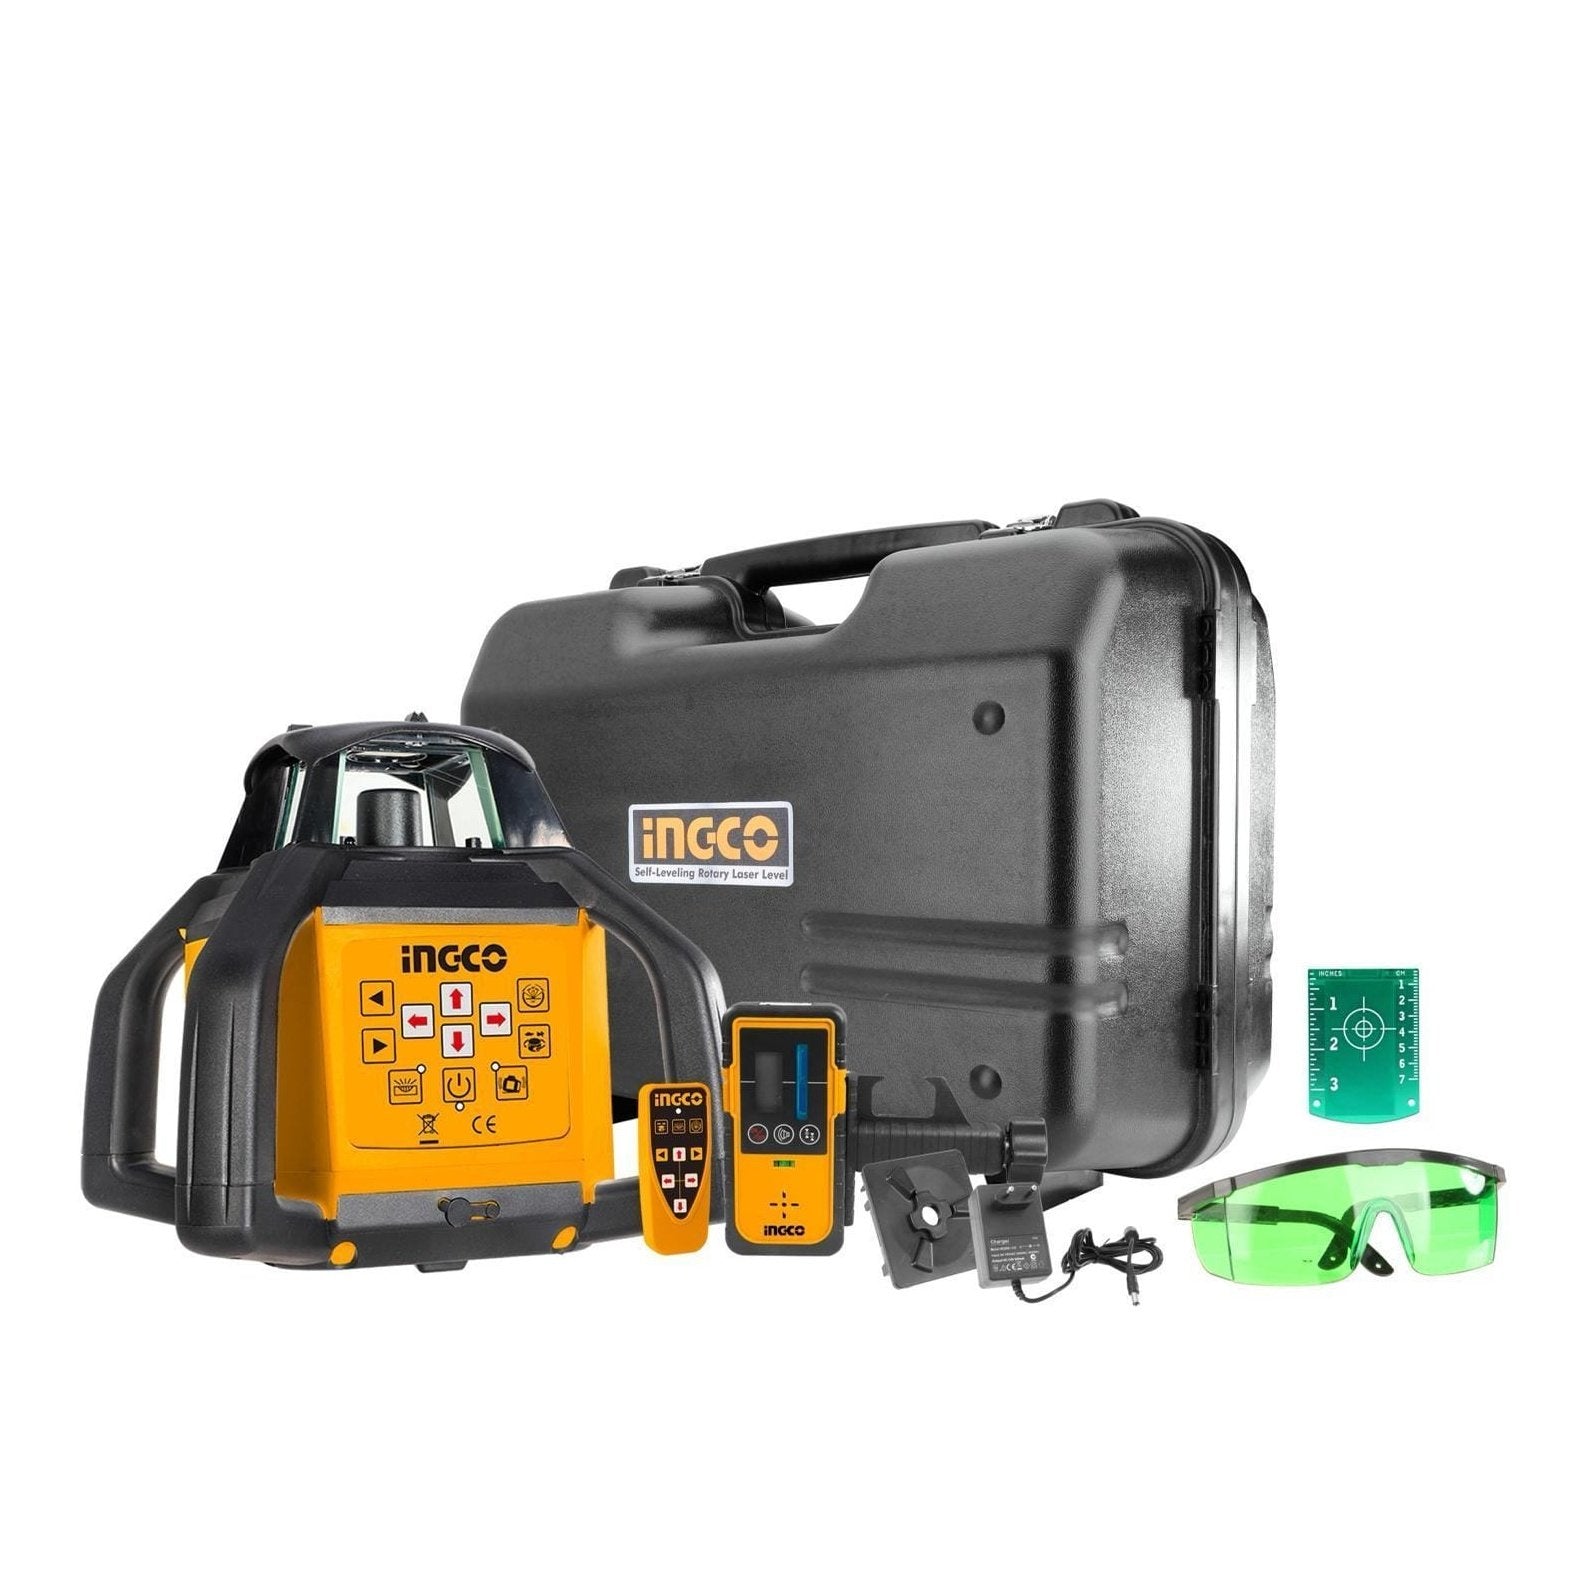 Ingco Self-Leveling Rotary Laser Level - HLRL30051 | Supply Master | Accra, Ghana Laser Measure Buy Tools hardware Building materials